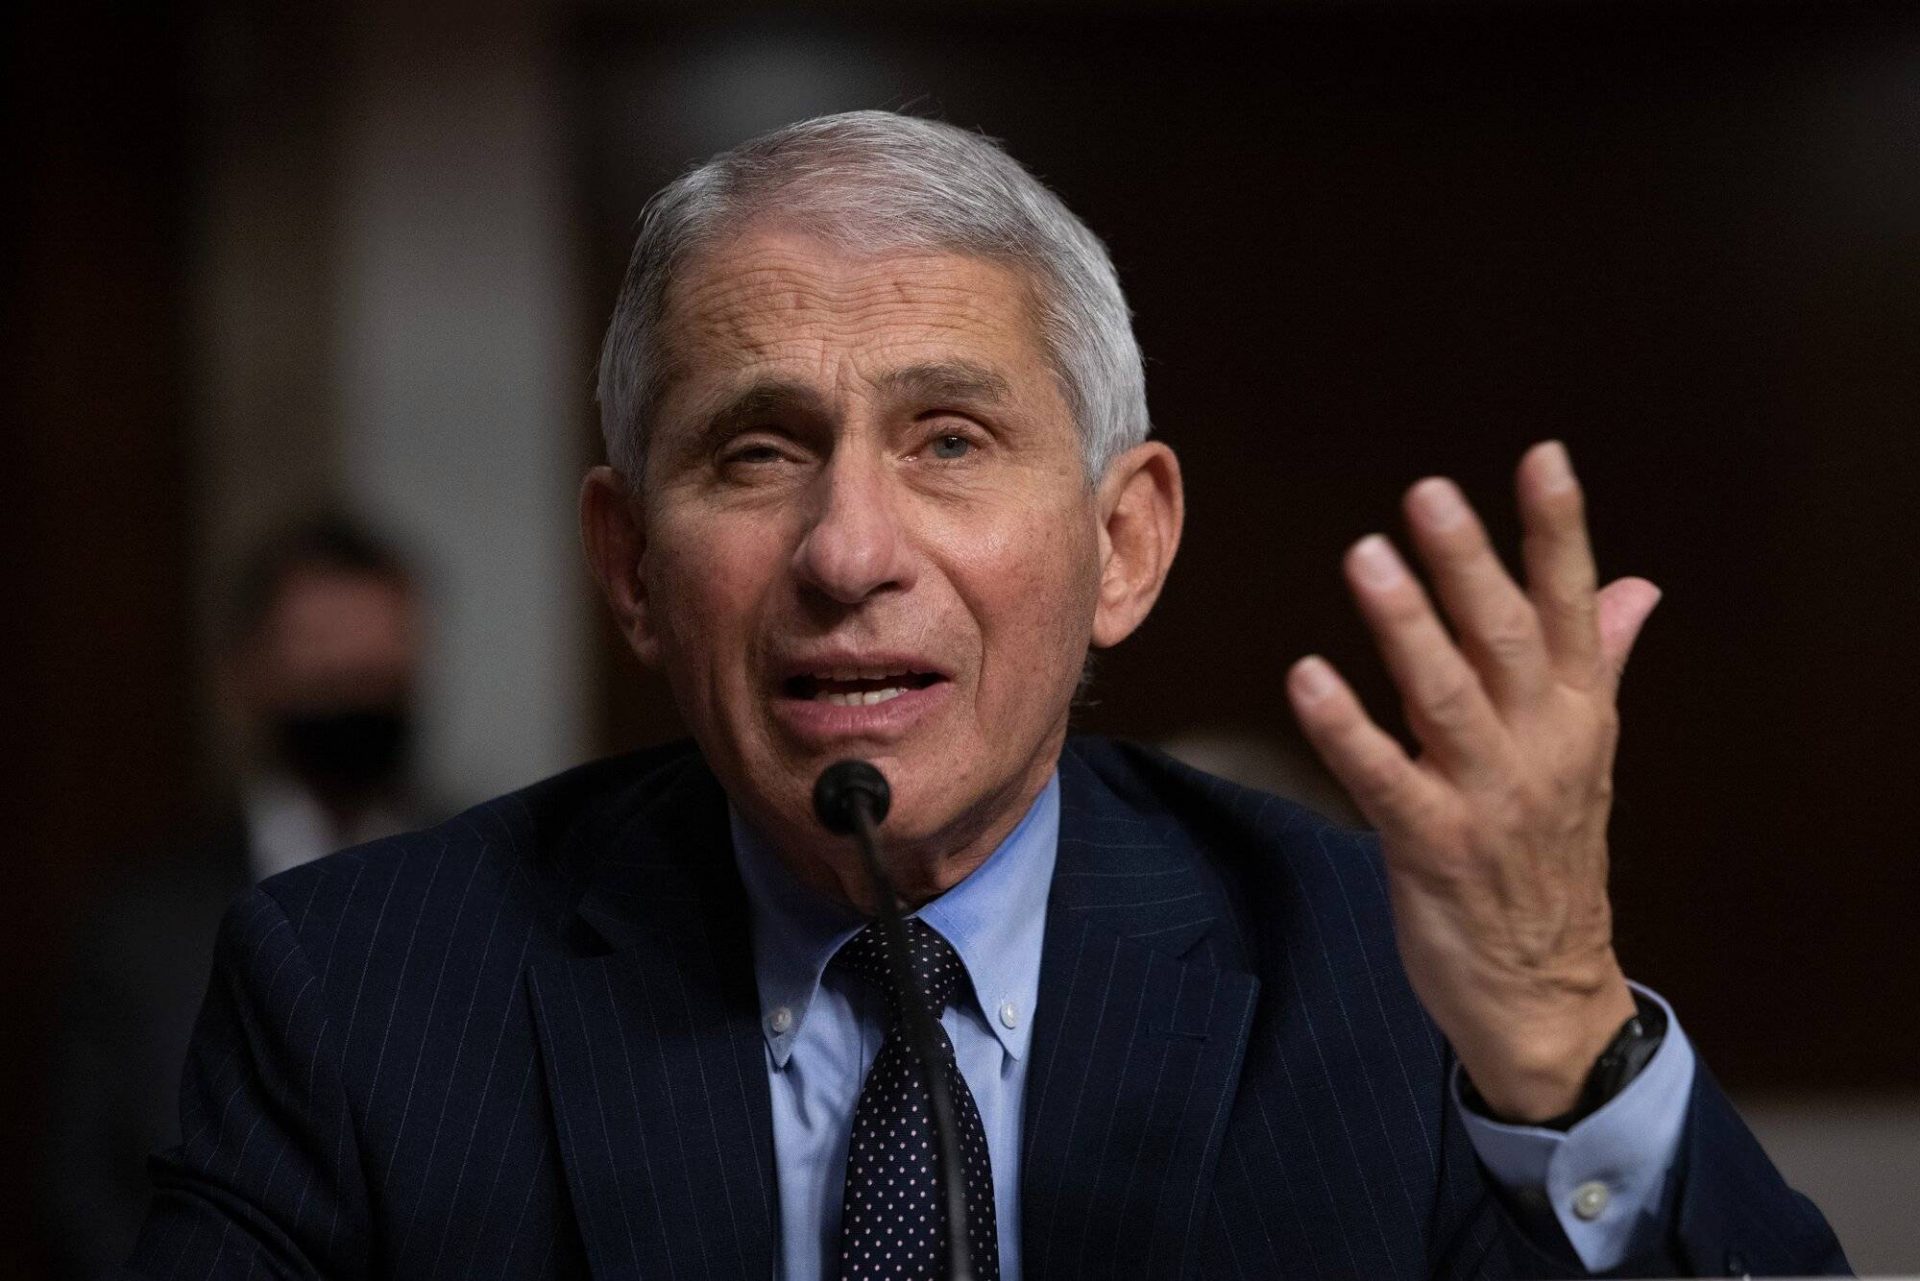 Dr. Fauci says it’s a immense mistake to compose that after getting a coronavirus vaccine